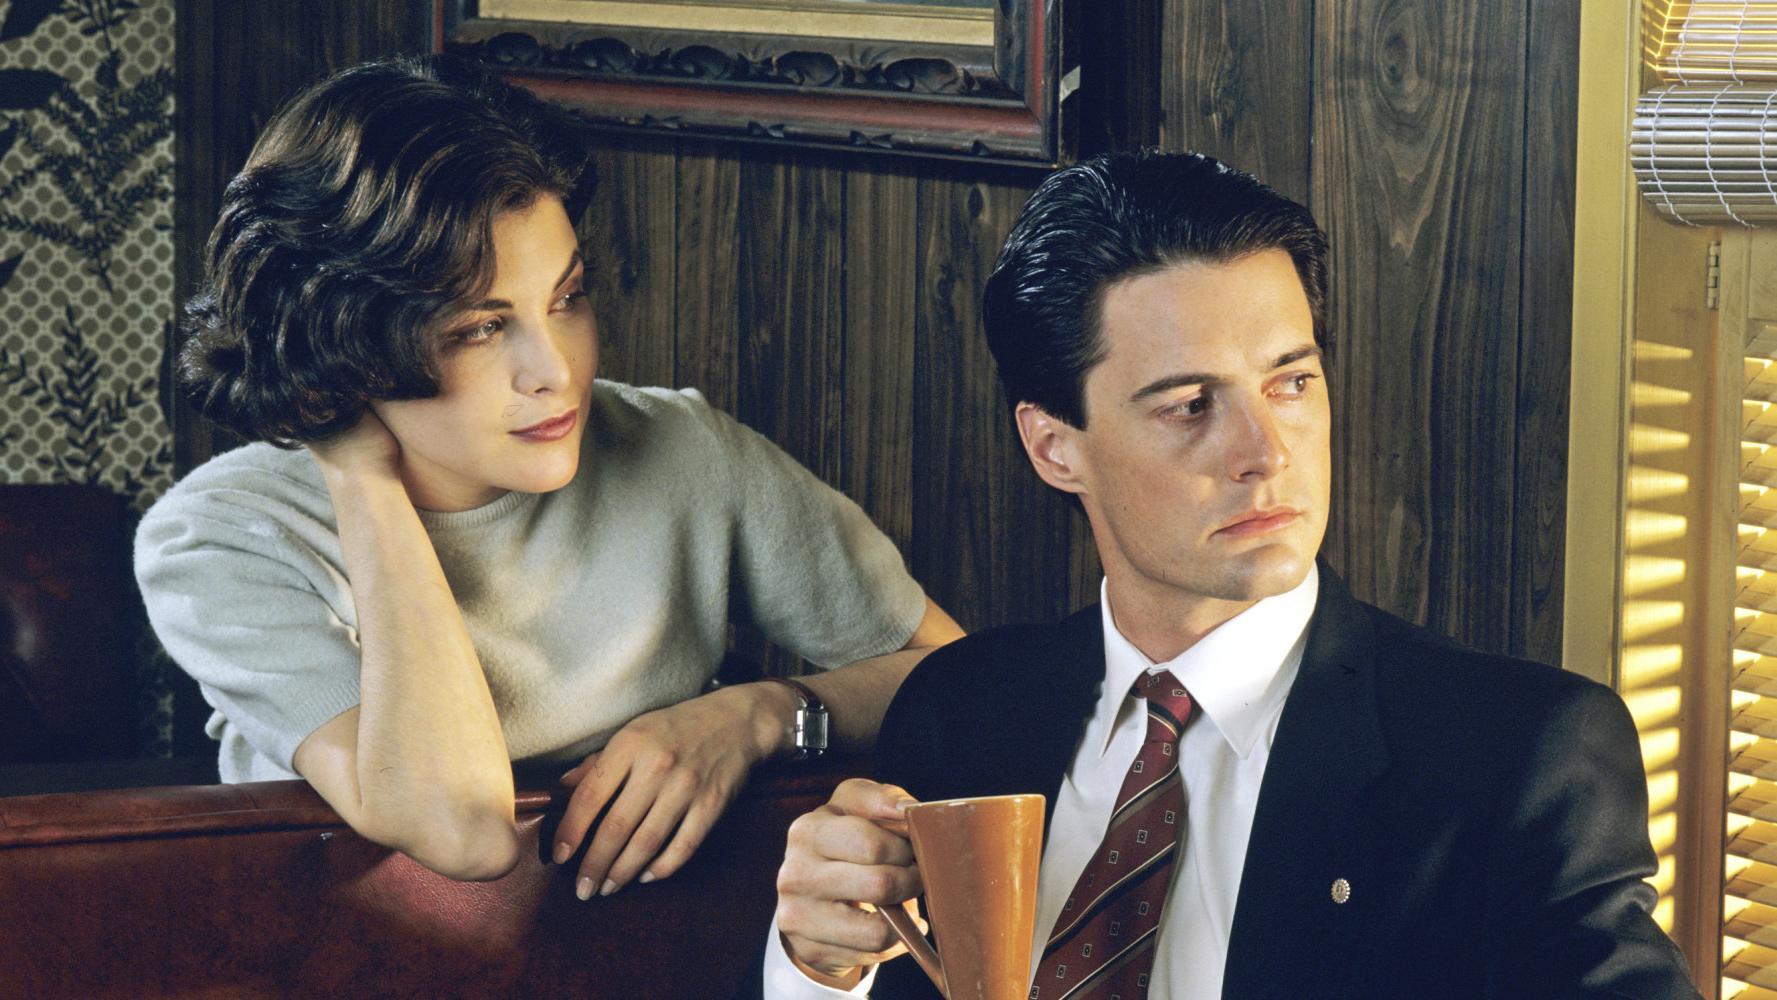 The old cast returns: MacLachlan as Agent Dale Cooper and Sherilyn Fenn as Audrey Horne in 'Twin Peaks'